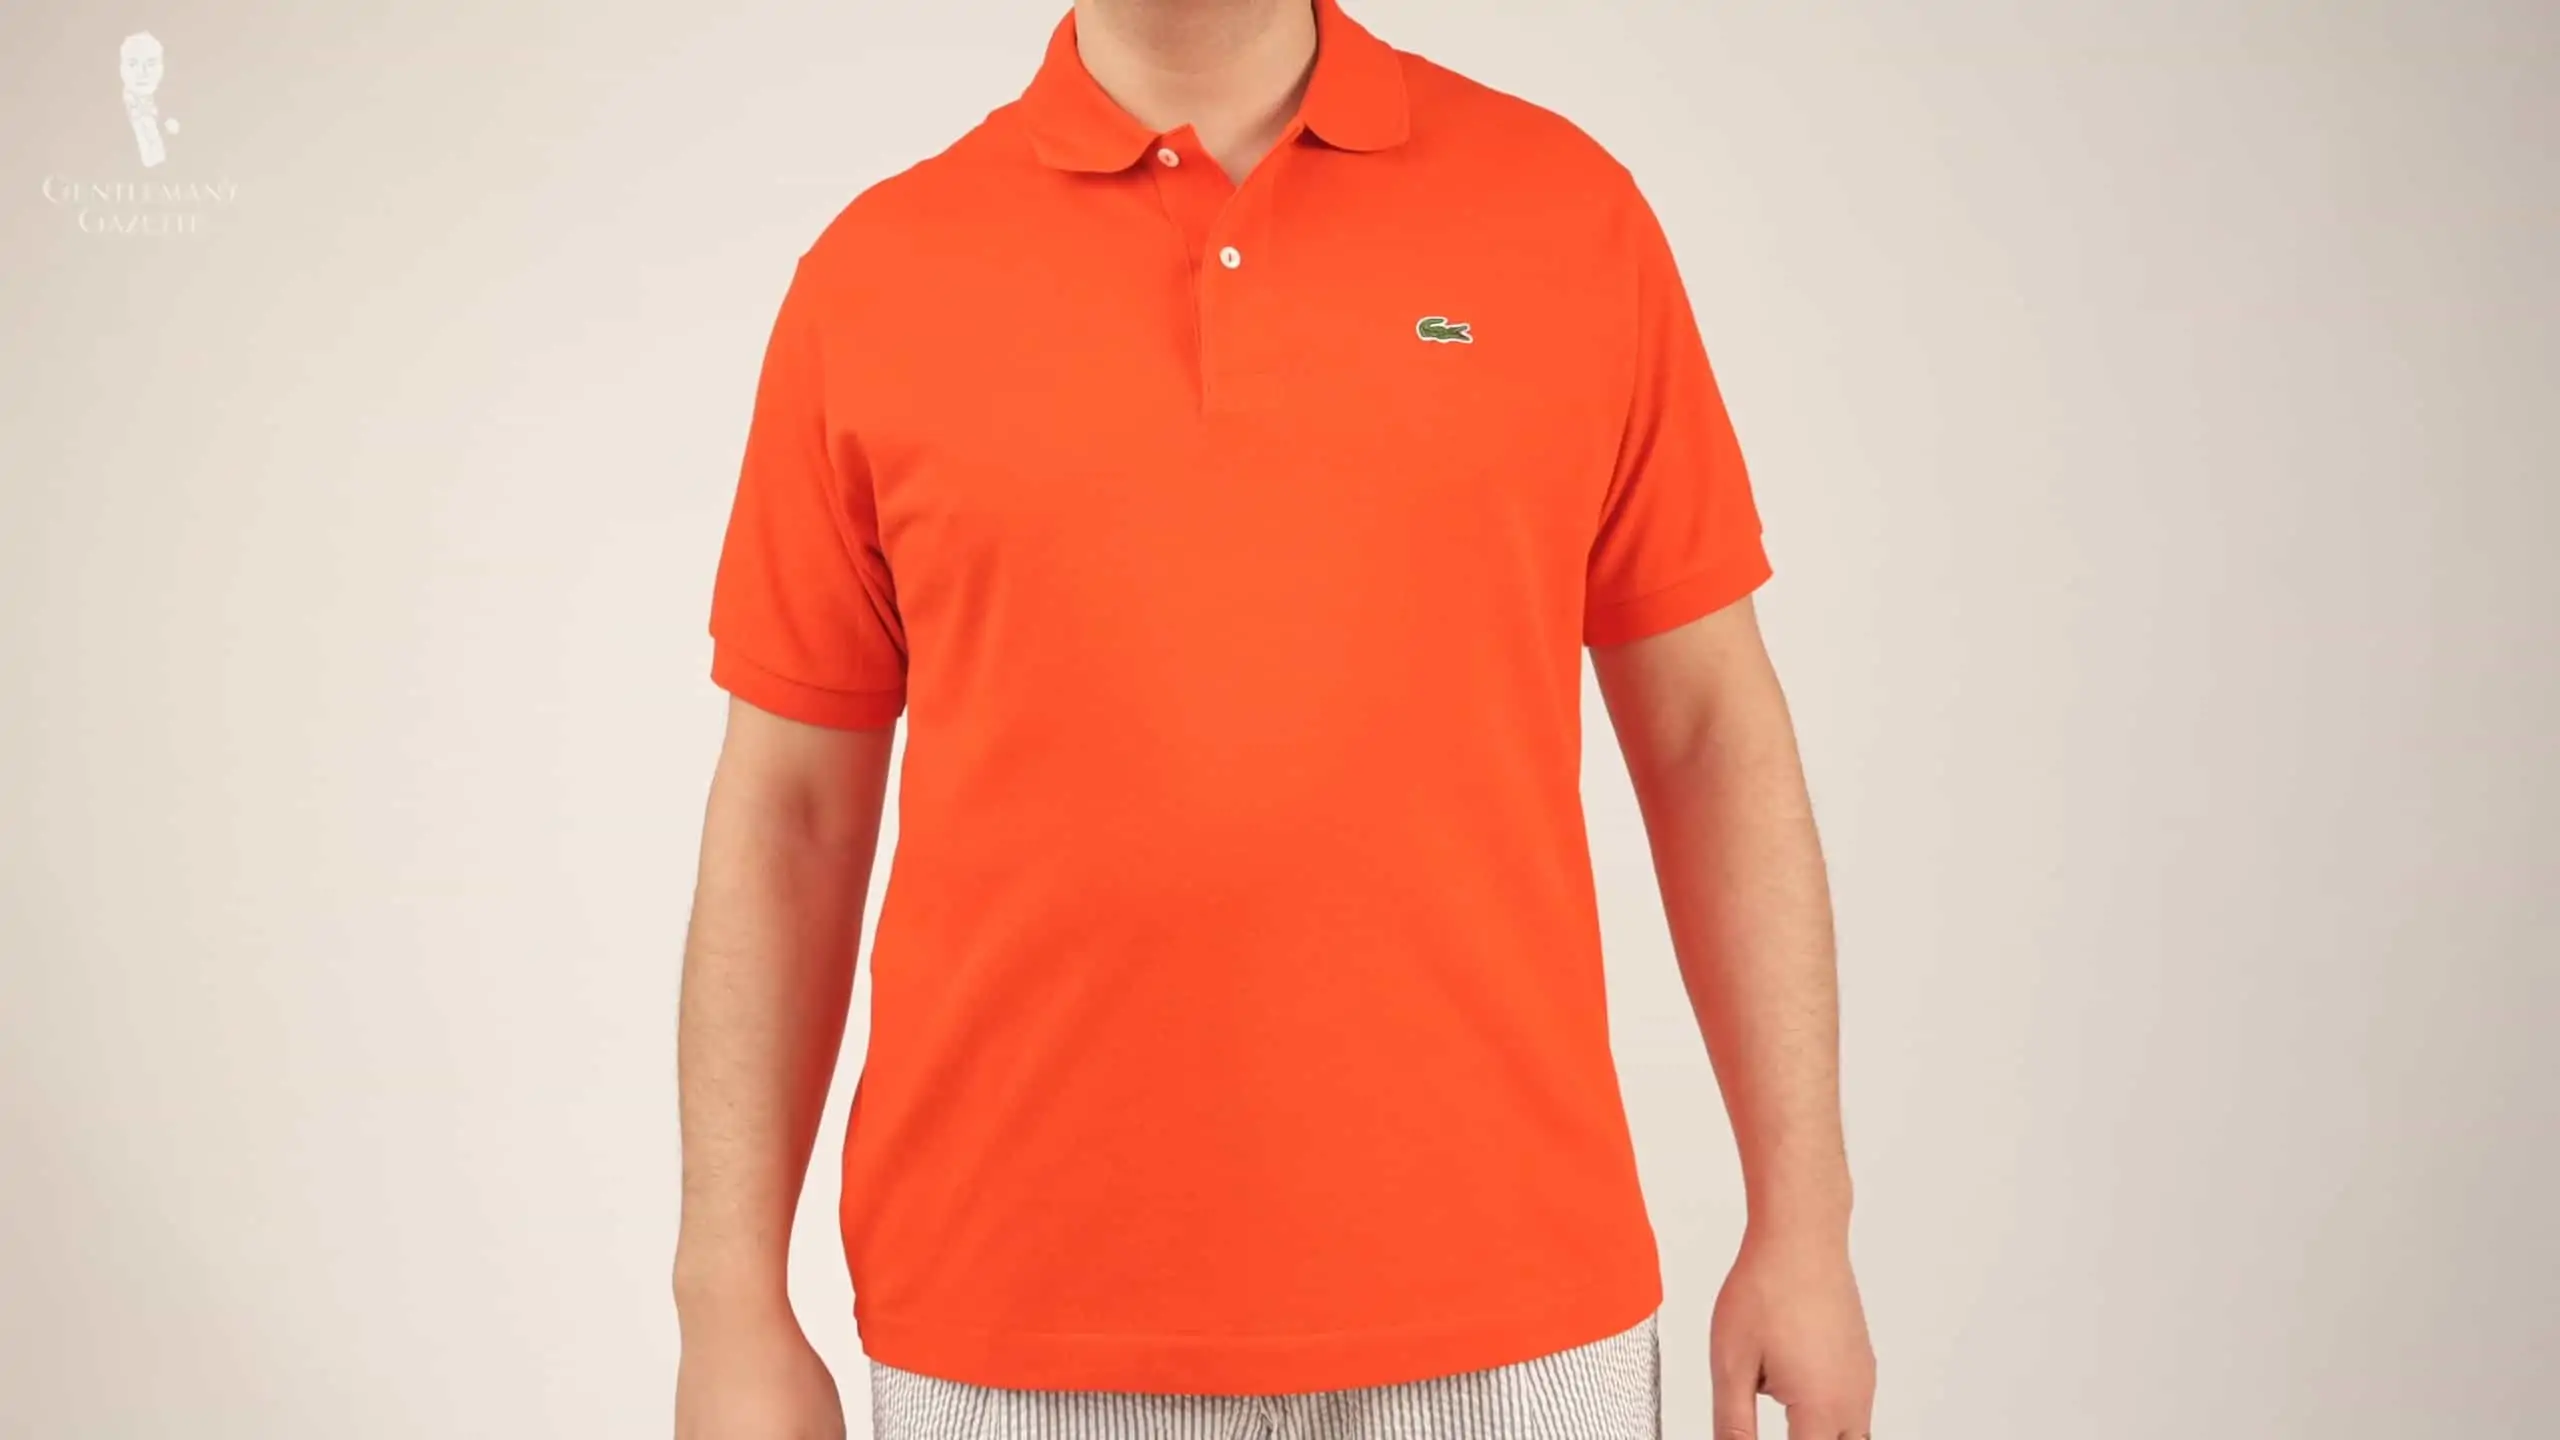 Lacoste Polo Shirt: Is Worth (In-Depth